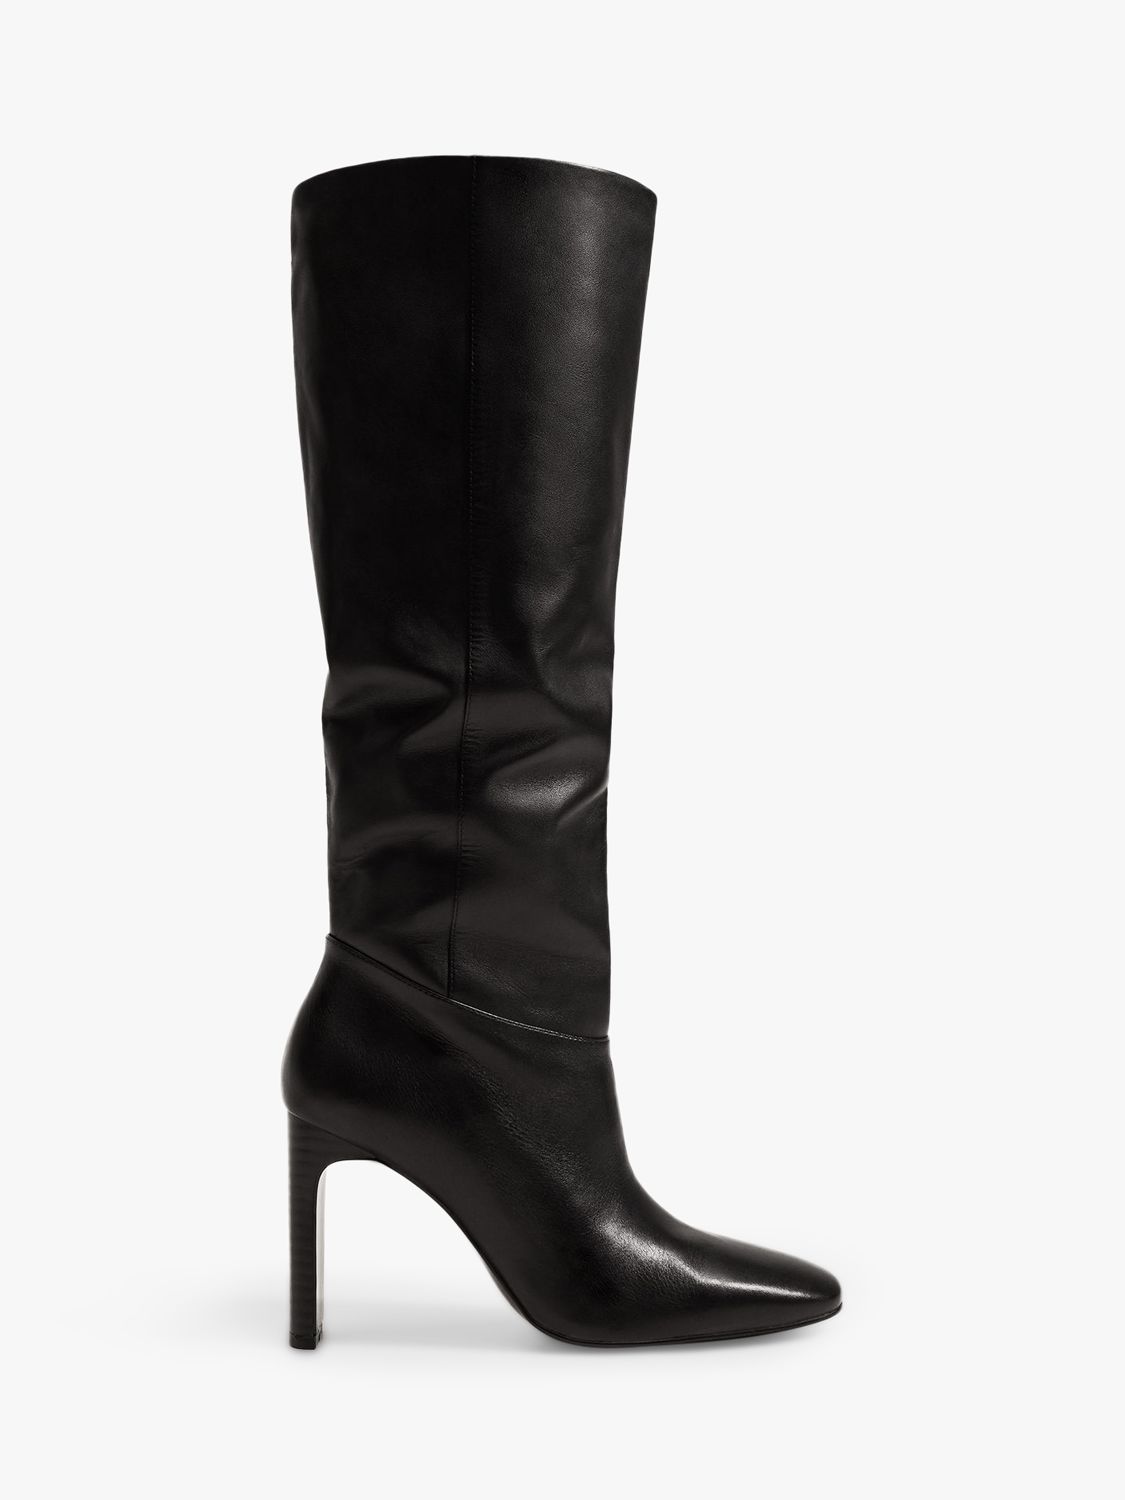 Mango Campo Leather Knee High Boots, Black, 2